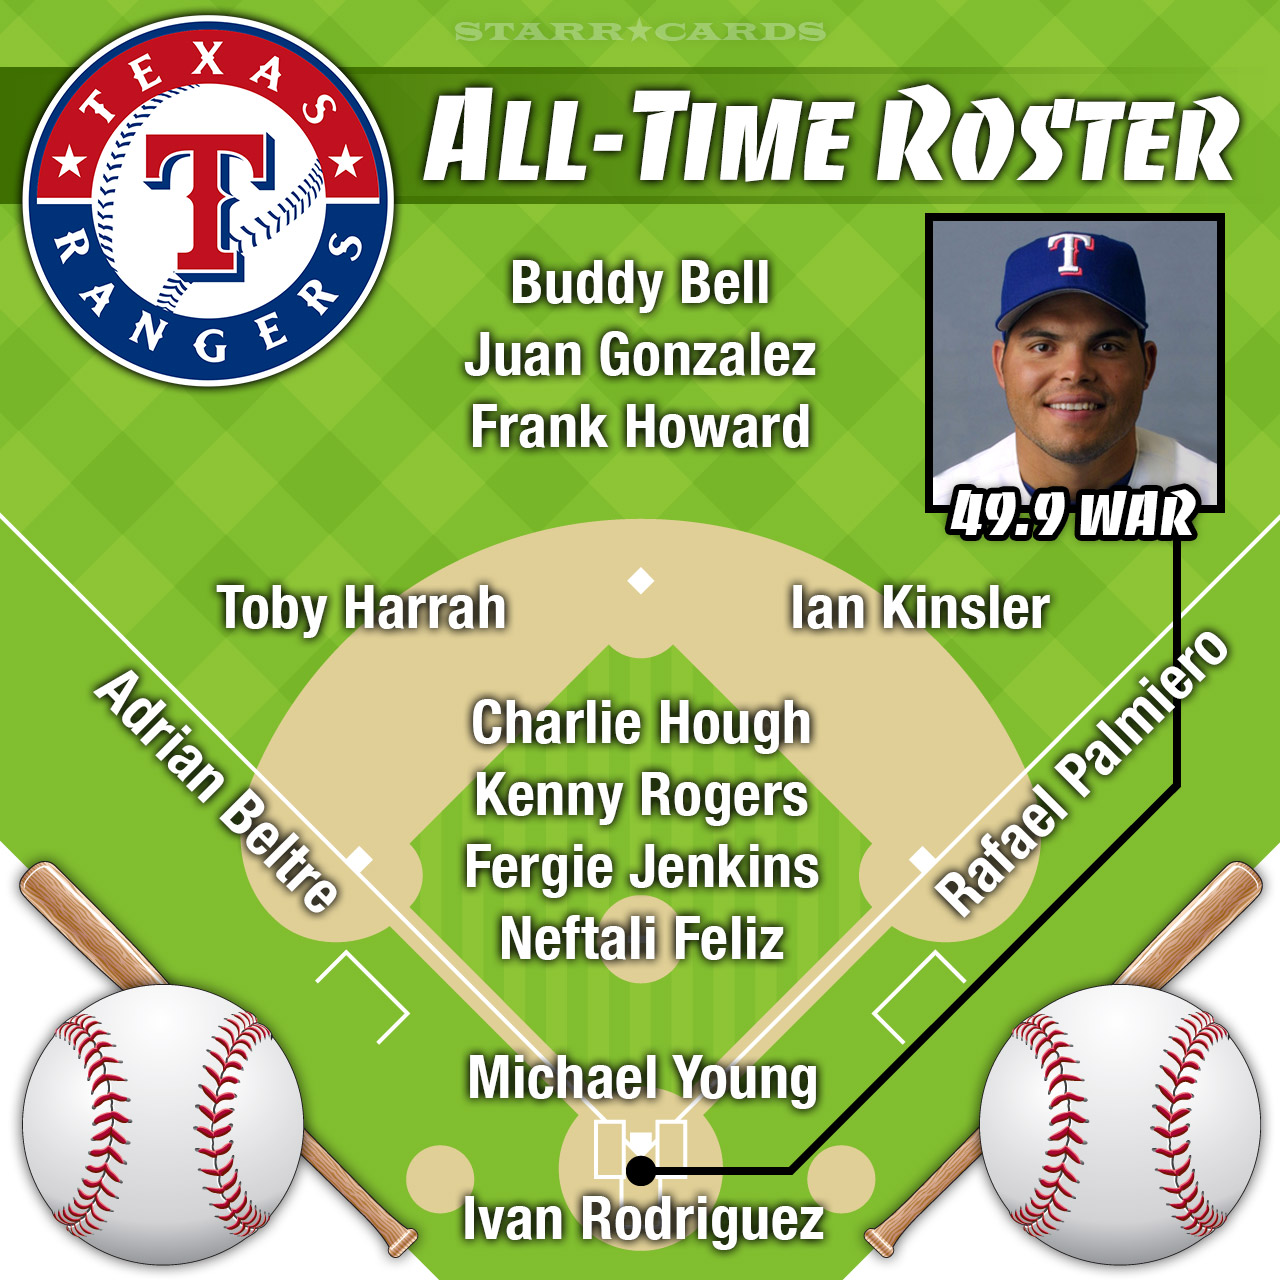 Ivan Rodriguez headlines Texas Rangers all-time roster by WAR